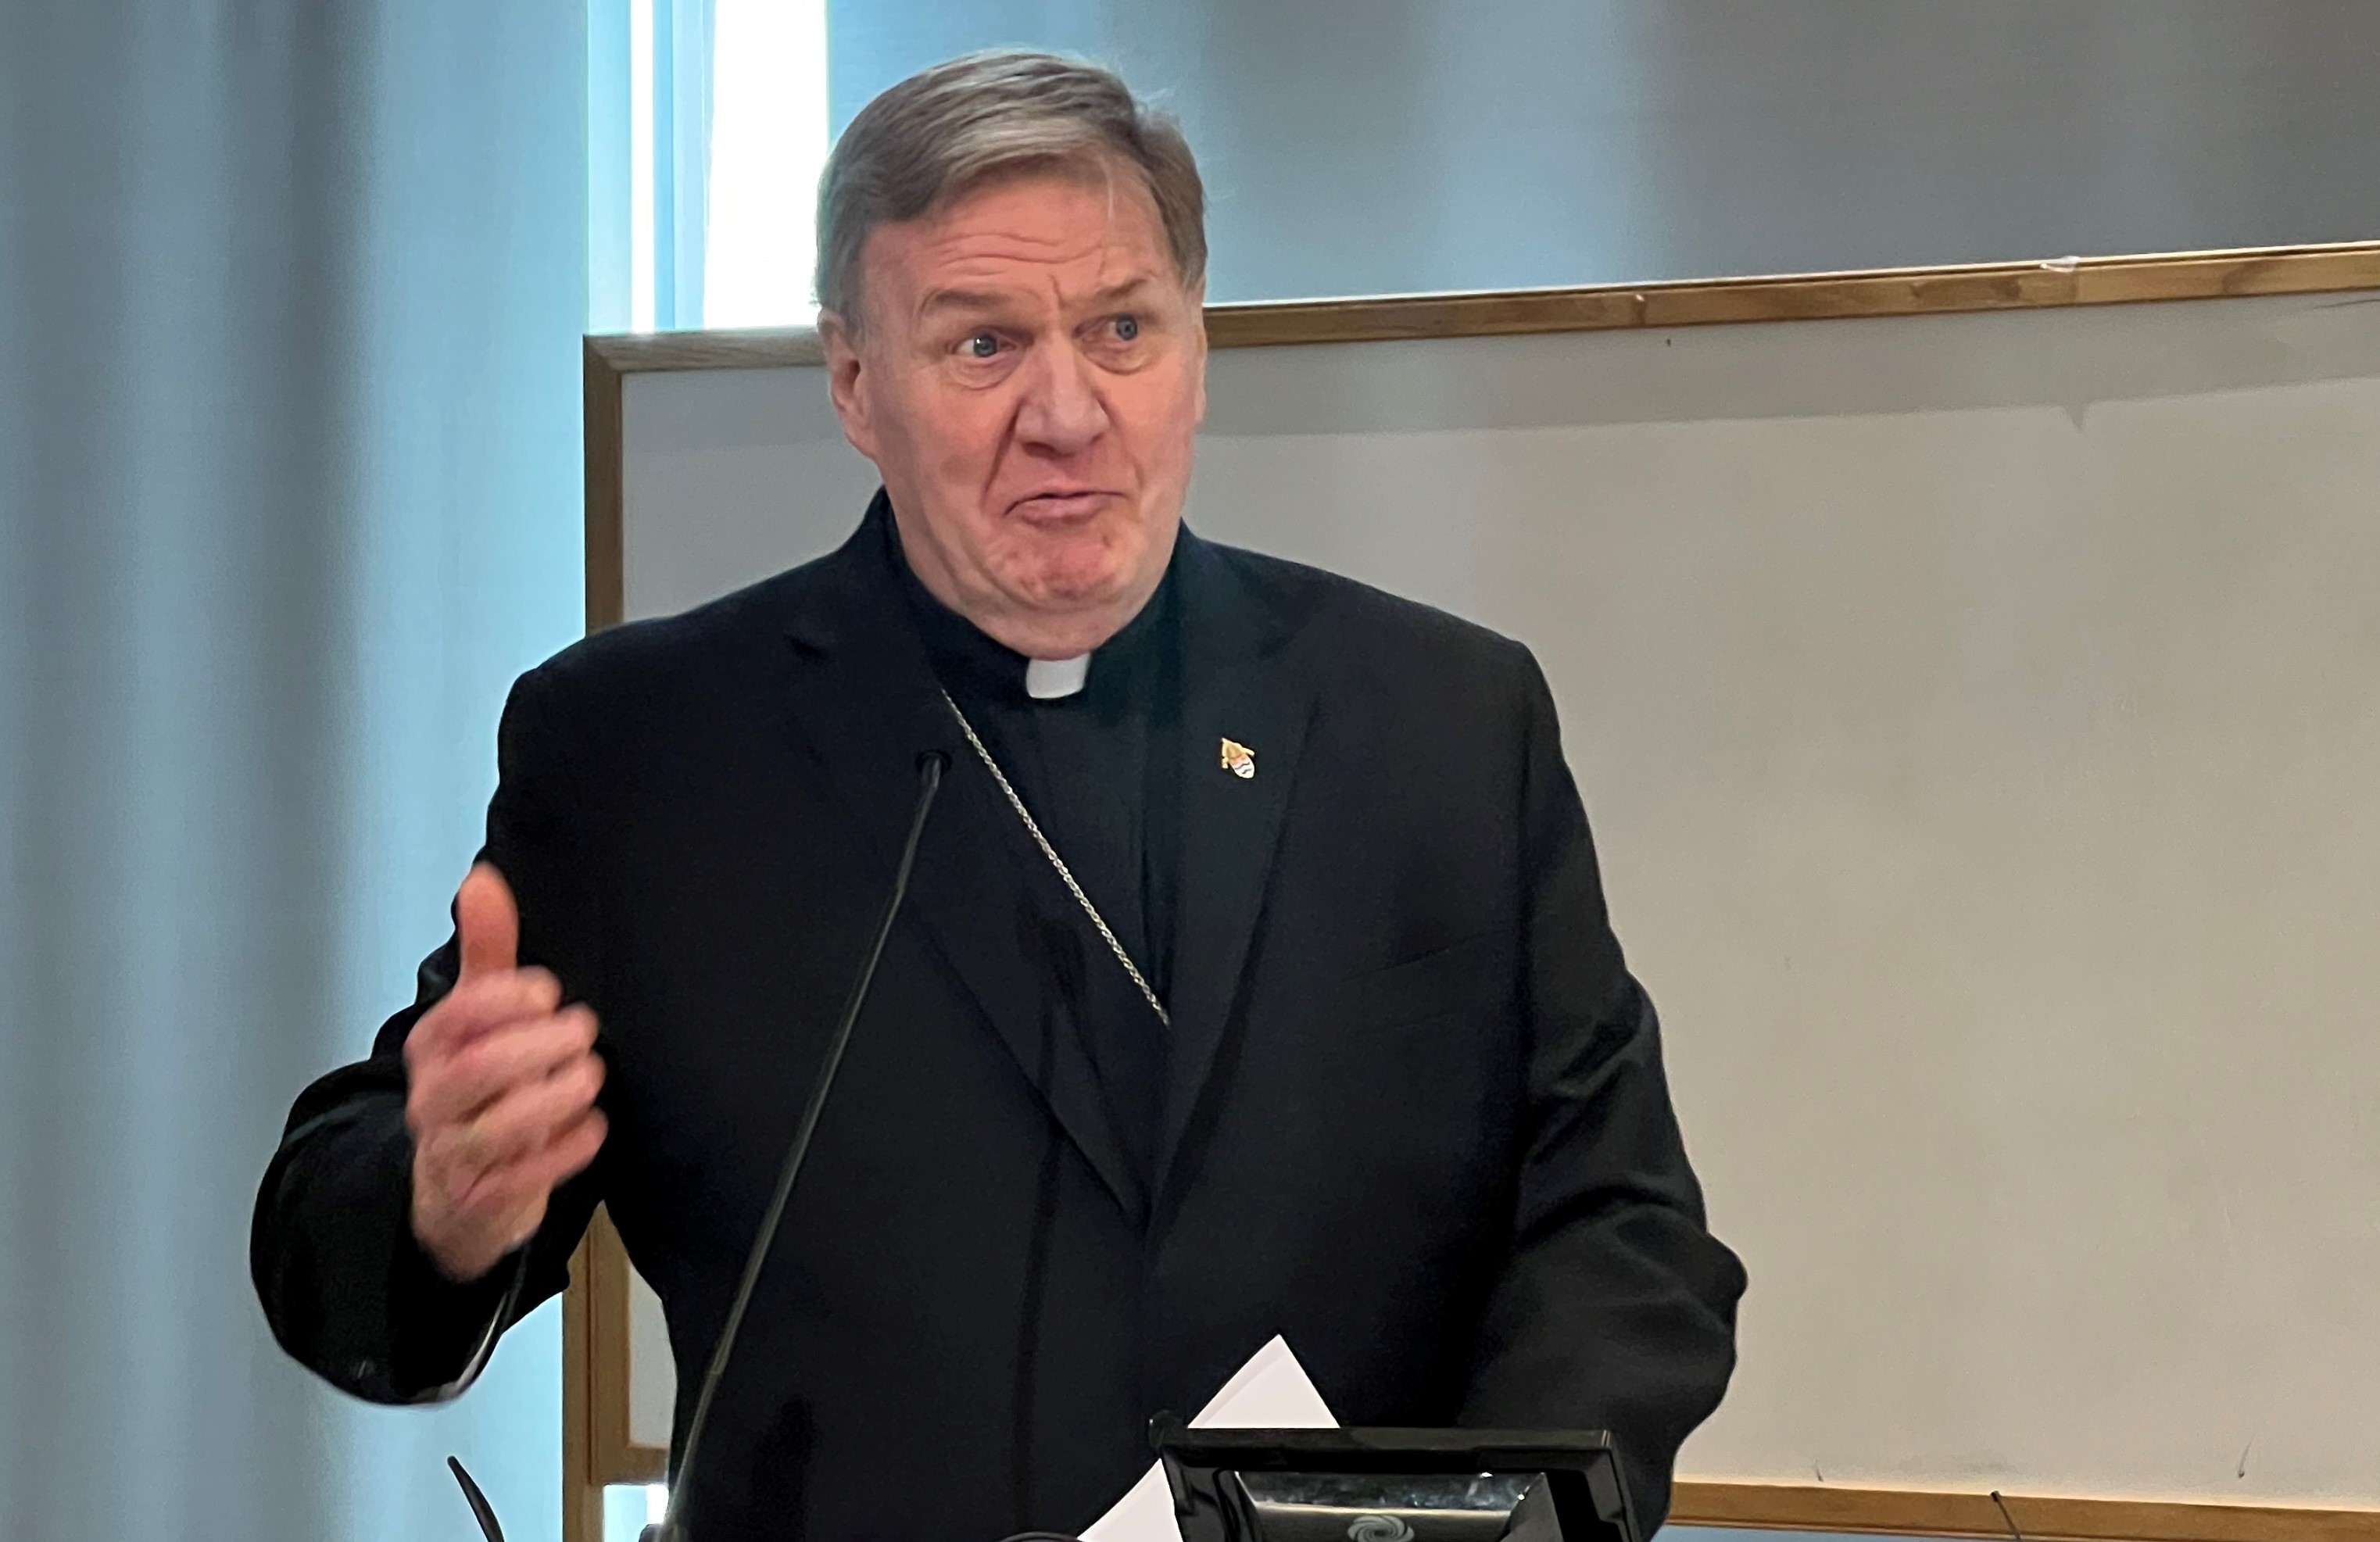 Cardinal Joseph Tobin, archbishop of Newark, New Jersey, presented "Pope Francis: Journey of Synodality" at Sacred Heart University In Fairfield, Connecticut, April 18. His talk was part of the Bergoglio Lecture Series. (NCR Photo/John Grosso)